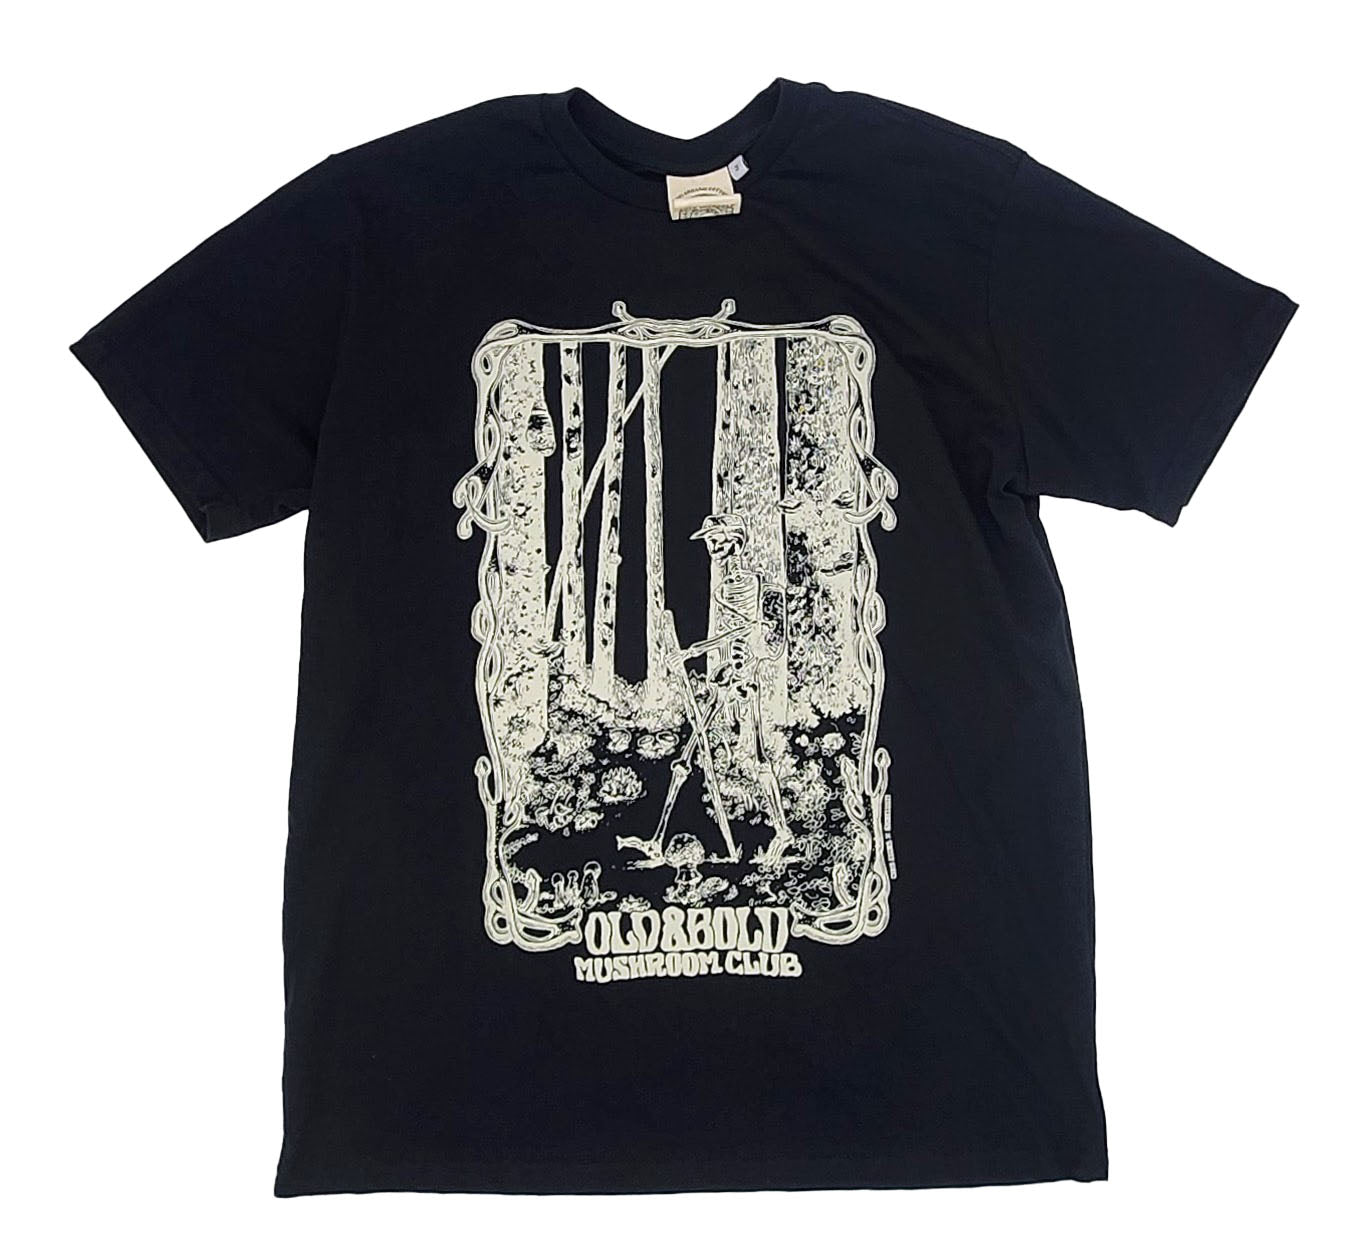 Old and Bold tee, Black